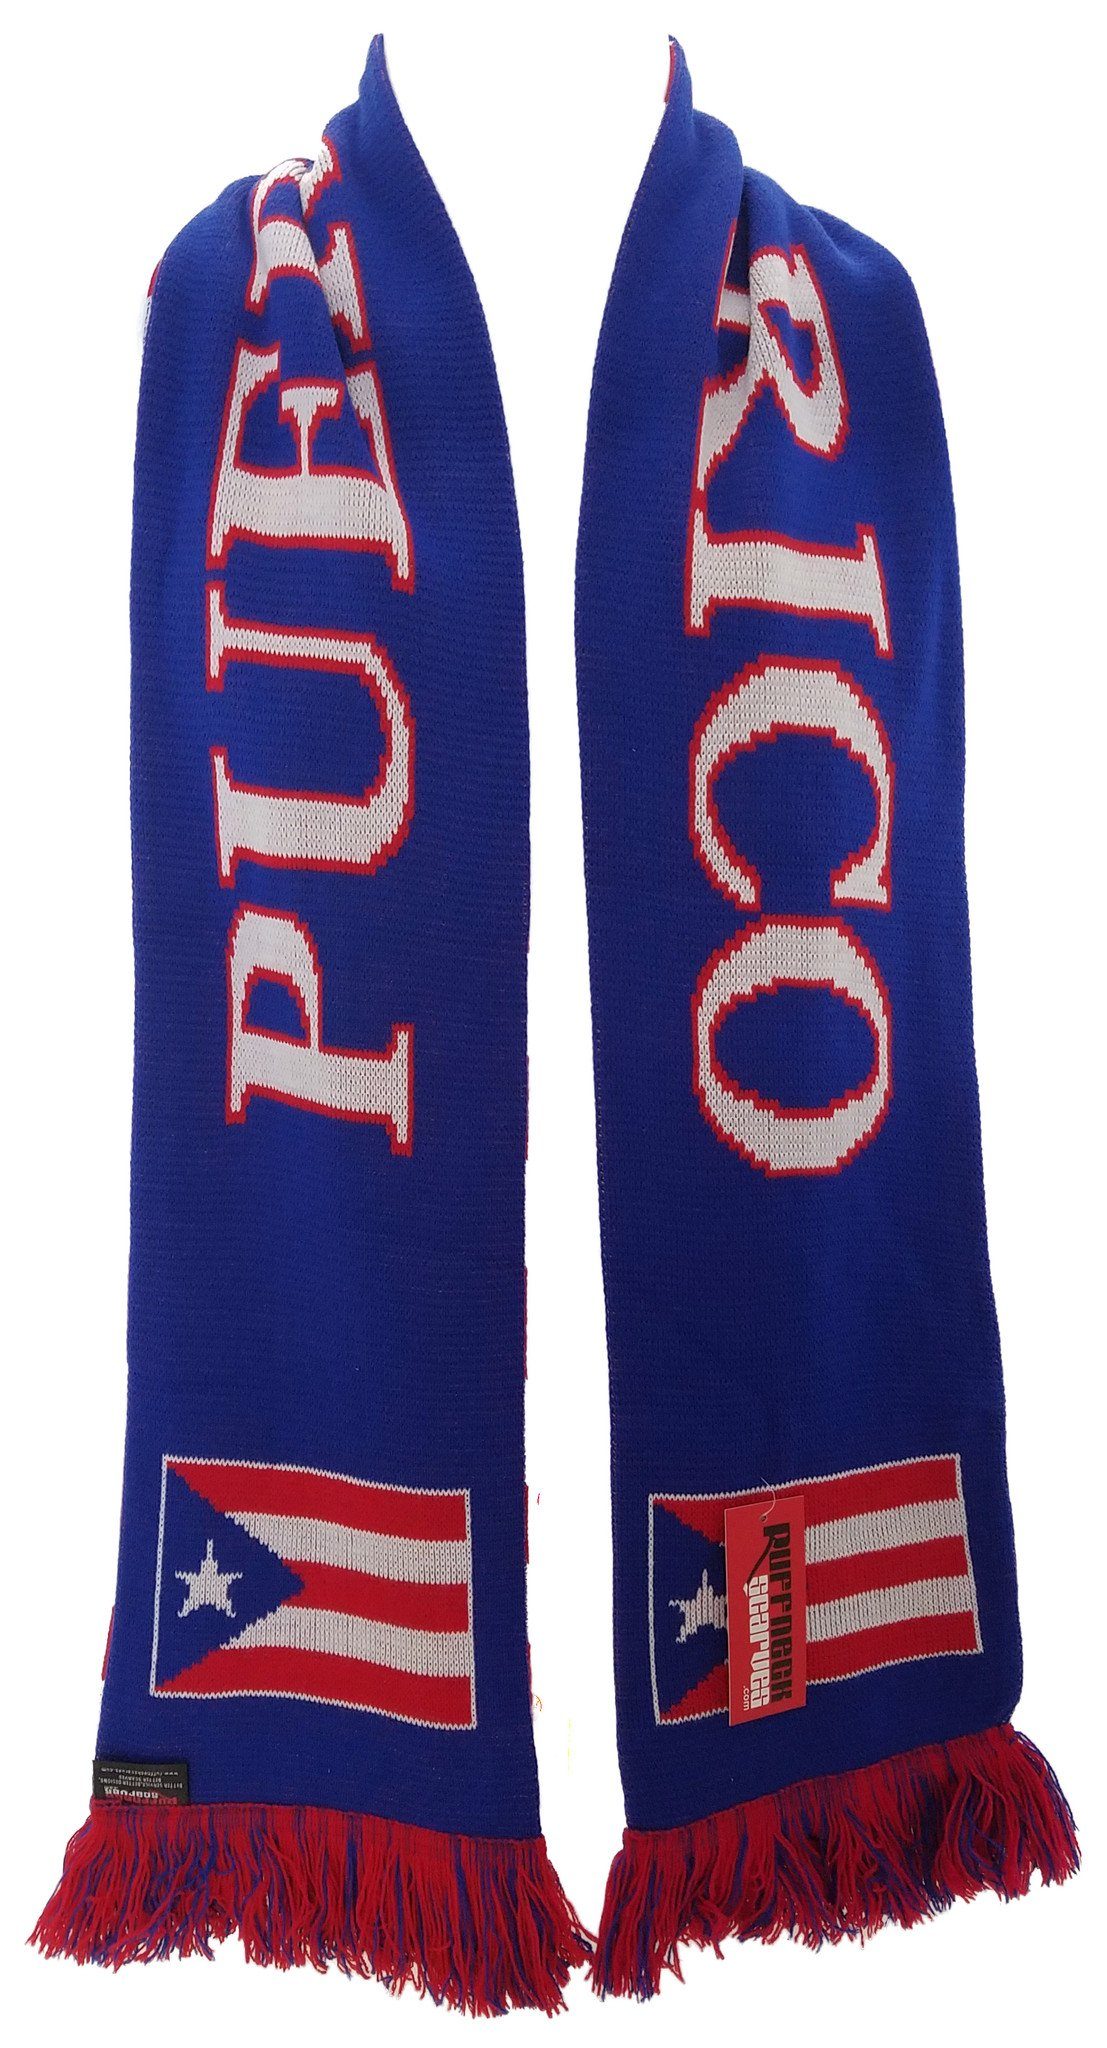 PUERTO RICO Scarf - Ruffneck Scarves - 2